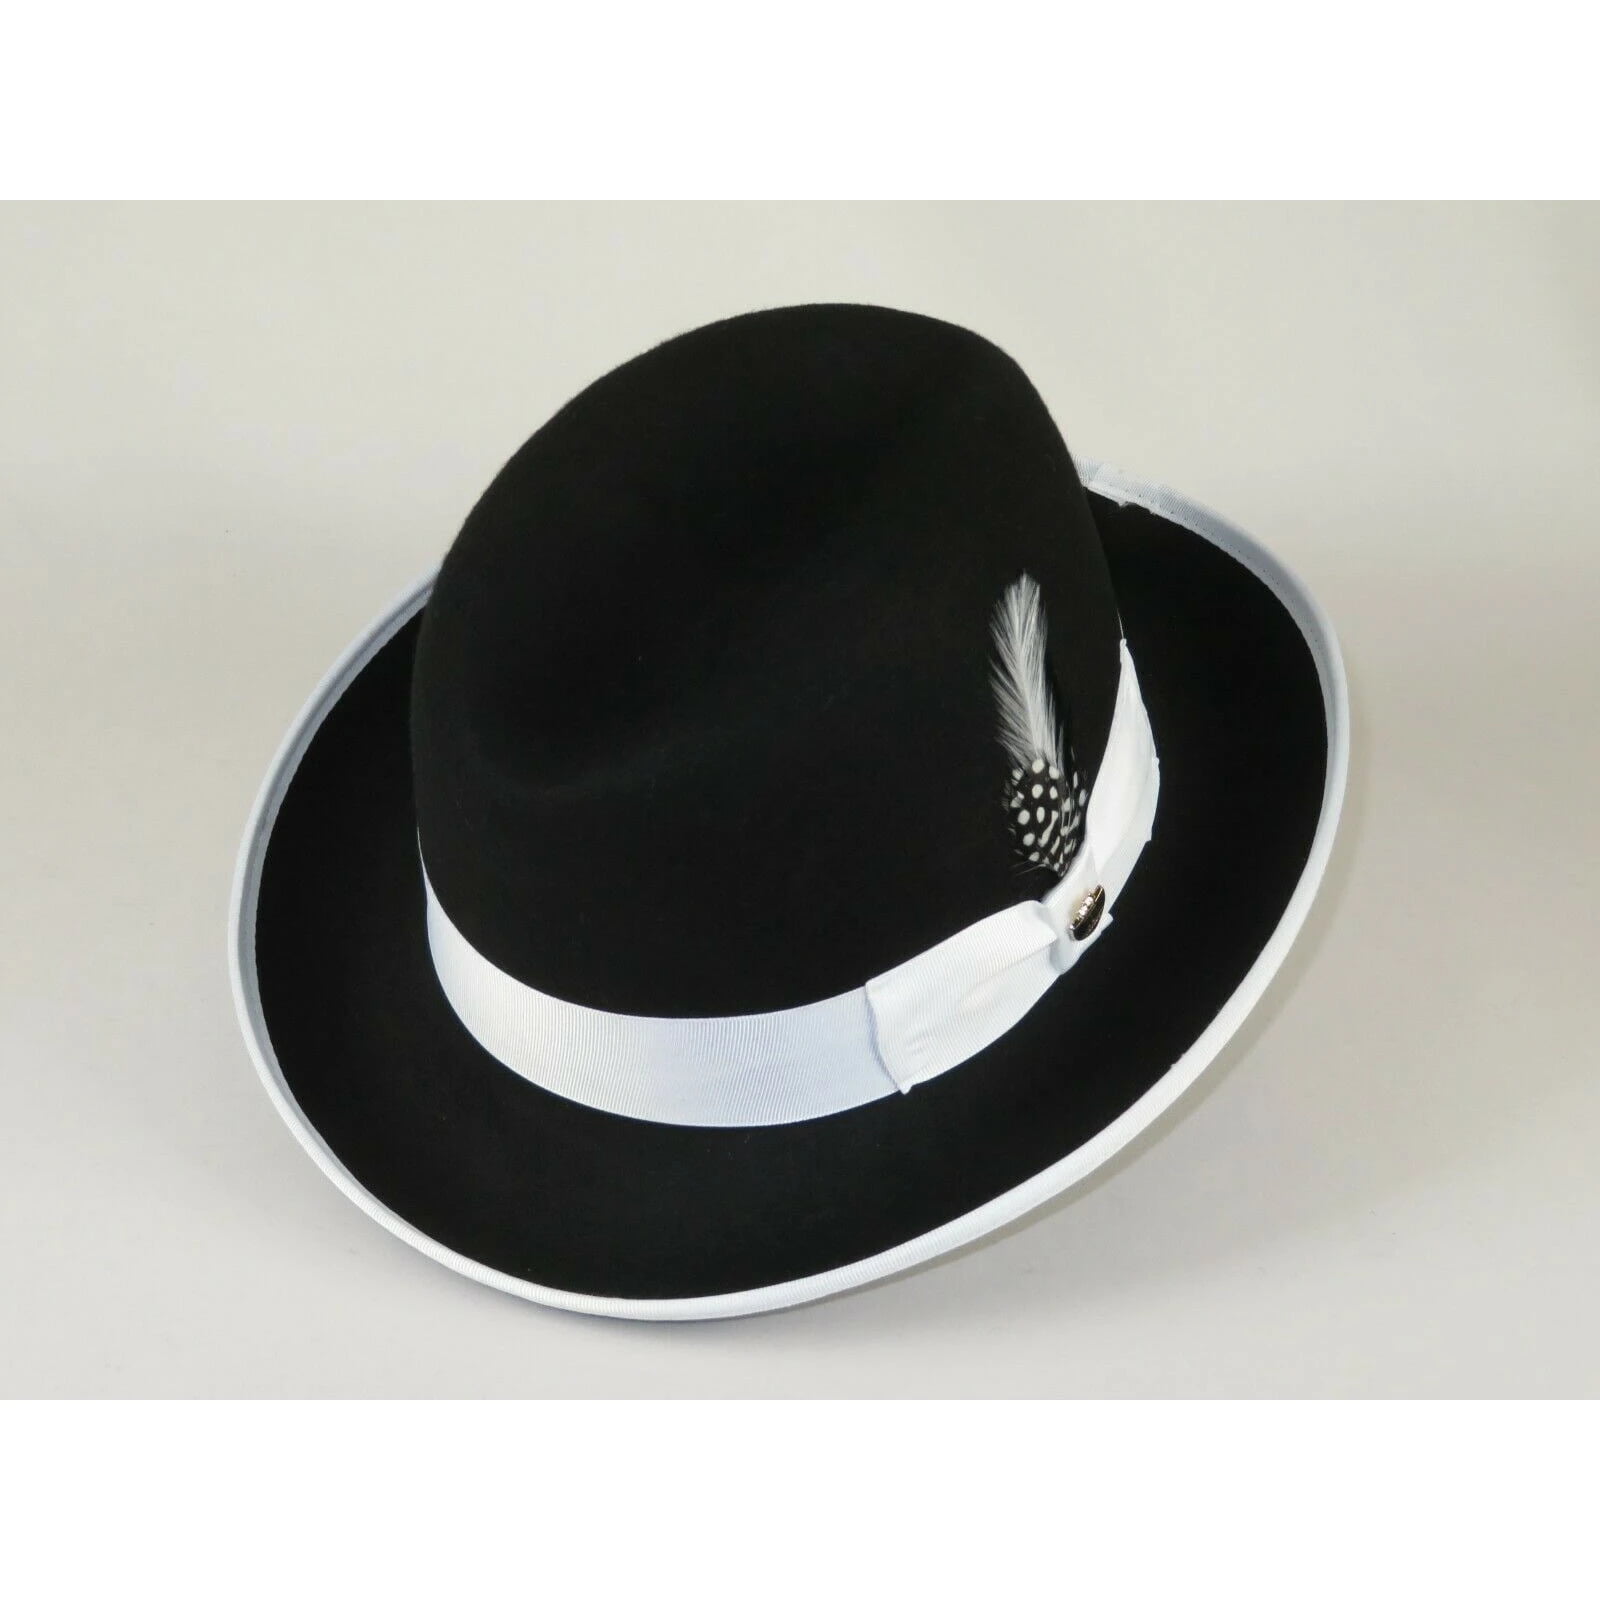 Men's Bruno Capelo Hat Godfather Black and White 100% Wool